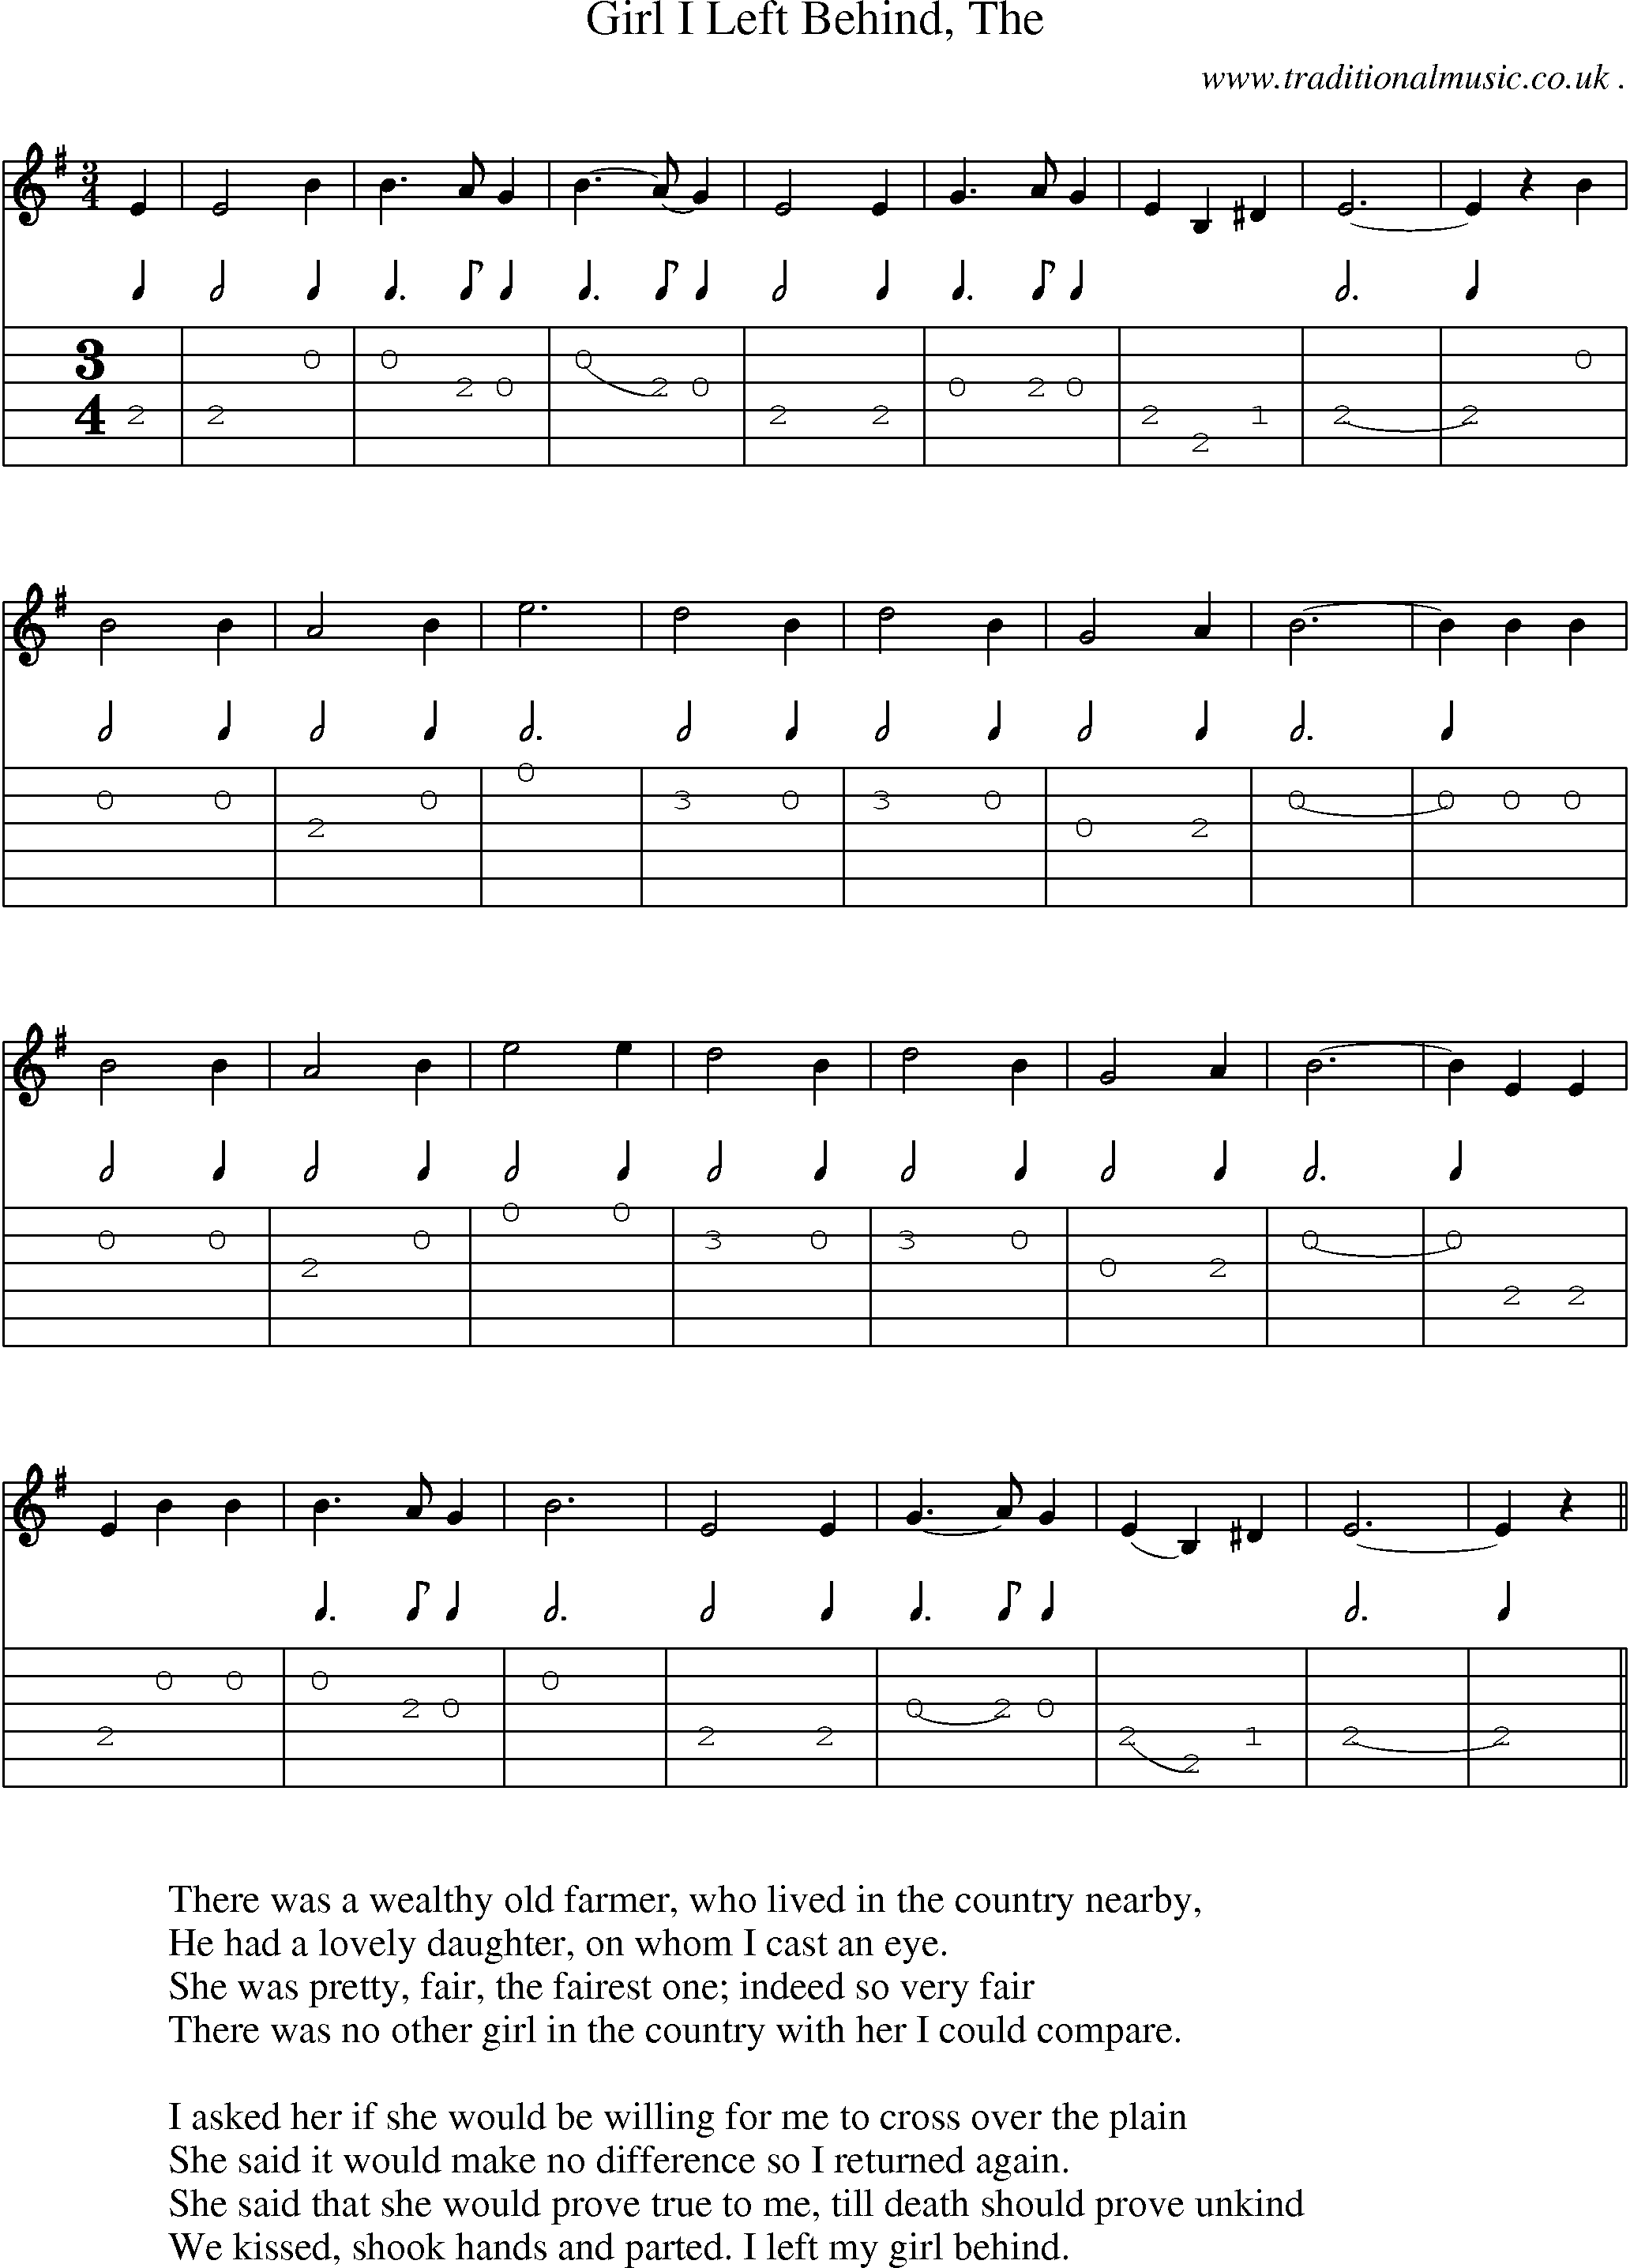 Music Score and Guitar Tabs for Girl I Left Behind The